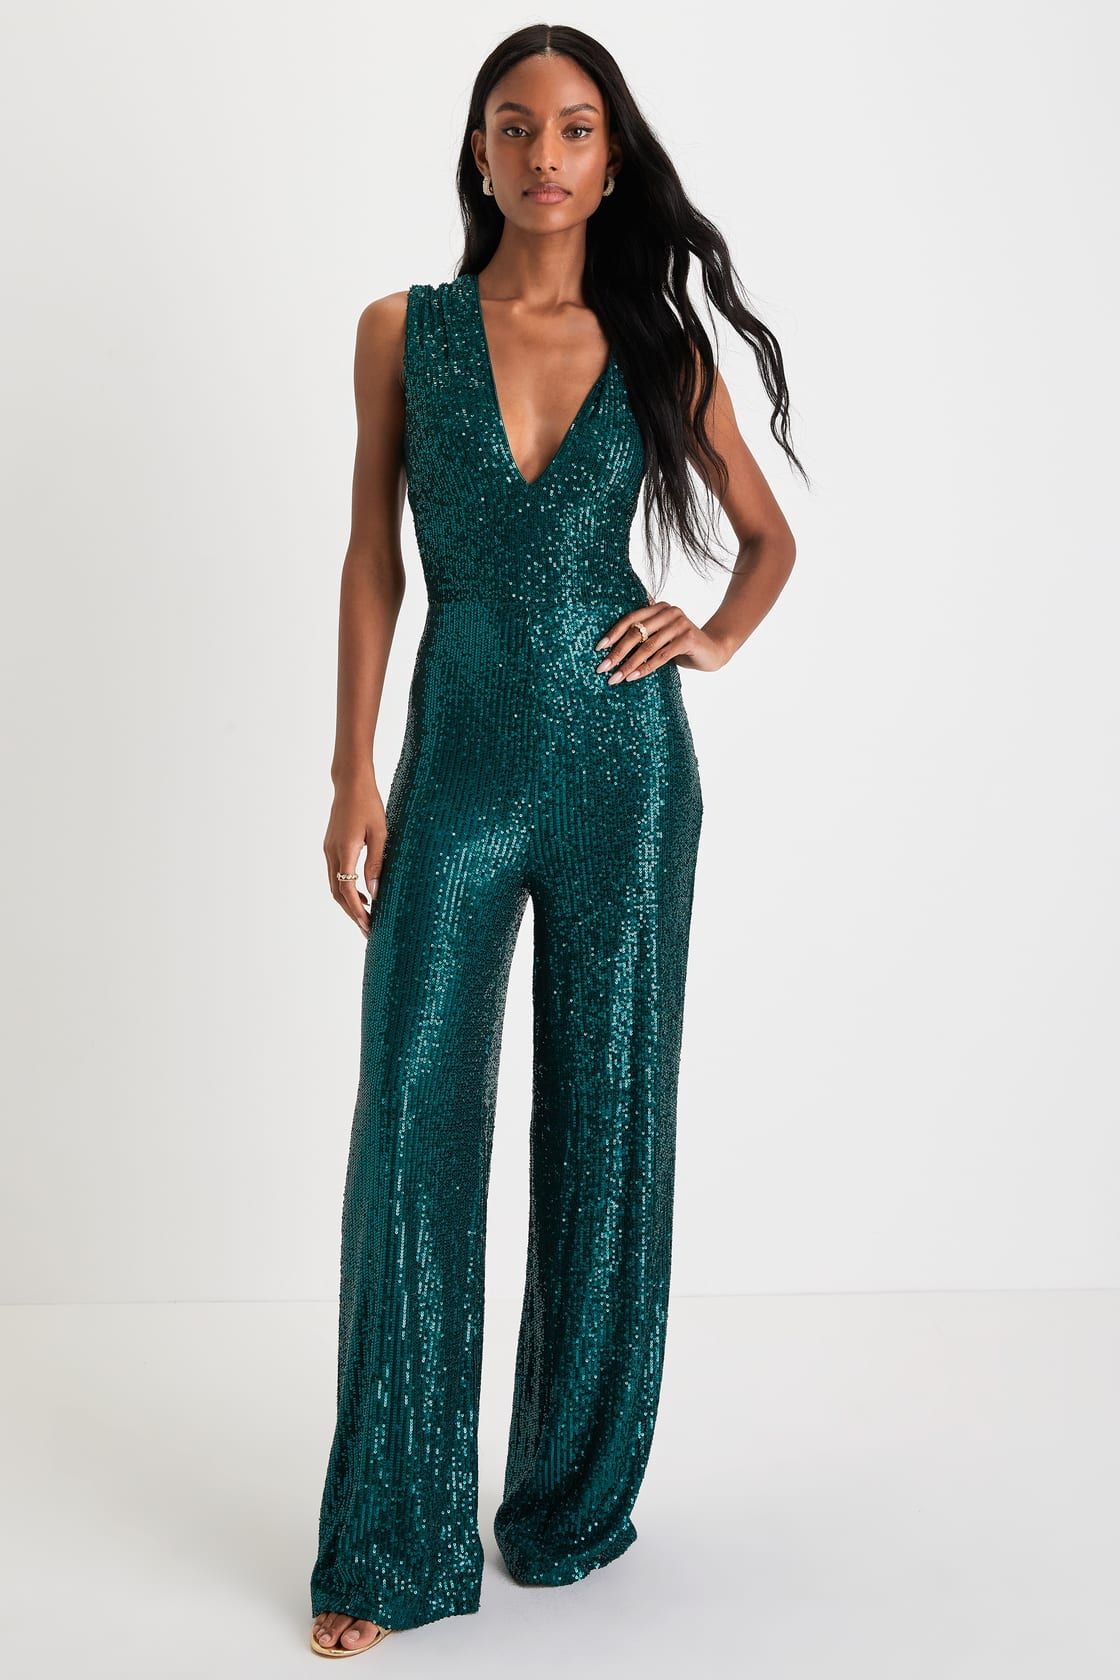 Thinking Out Loud Emerald Green Sequin Backless Jumpsuit | Lulus (US)